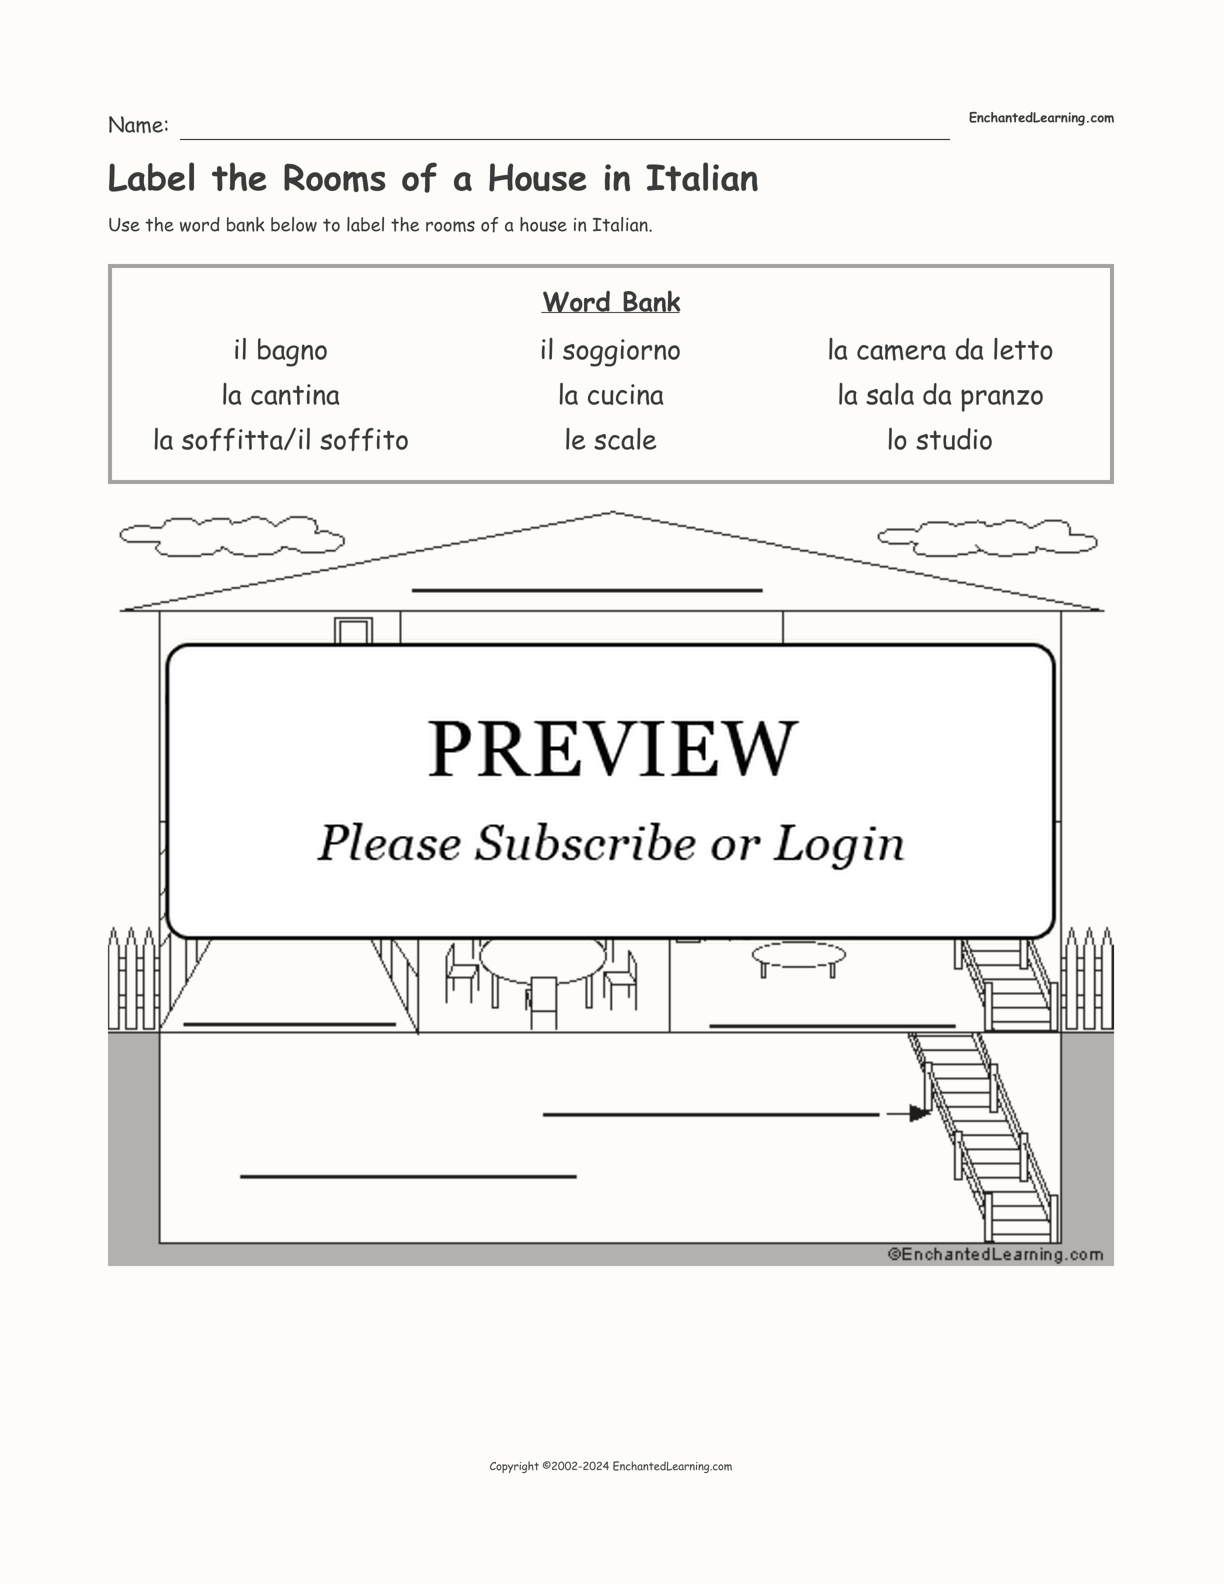 Label the Rooms of a House in Italian interactive worksheet page 1